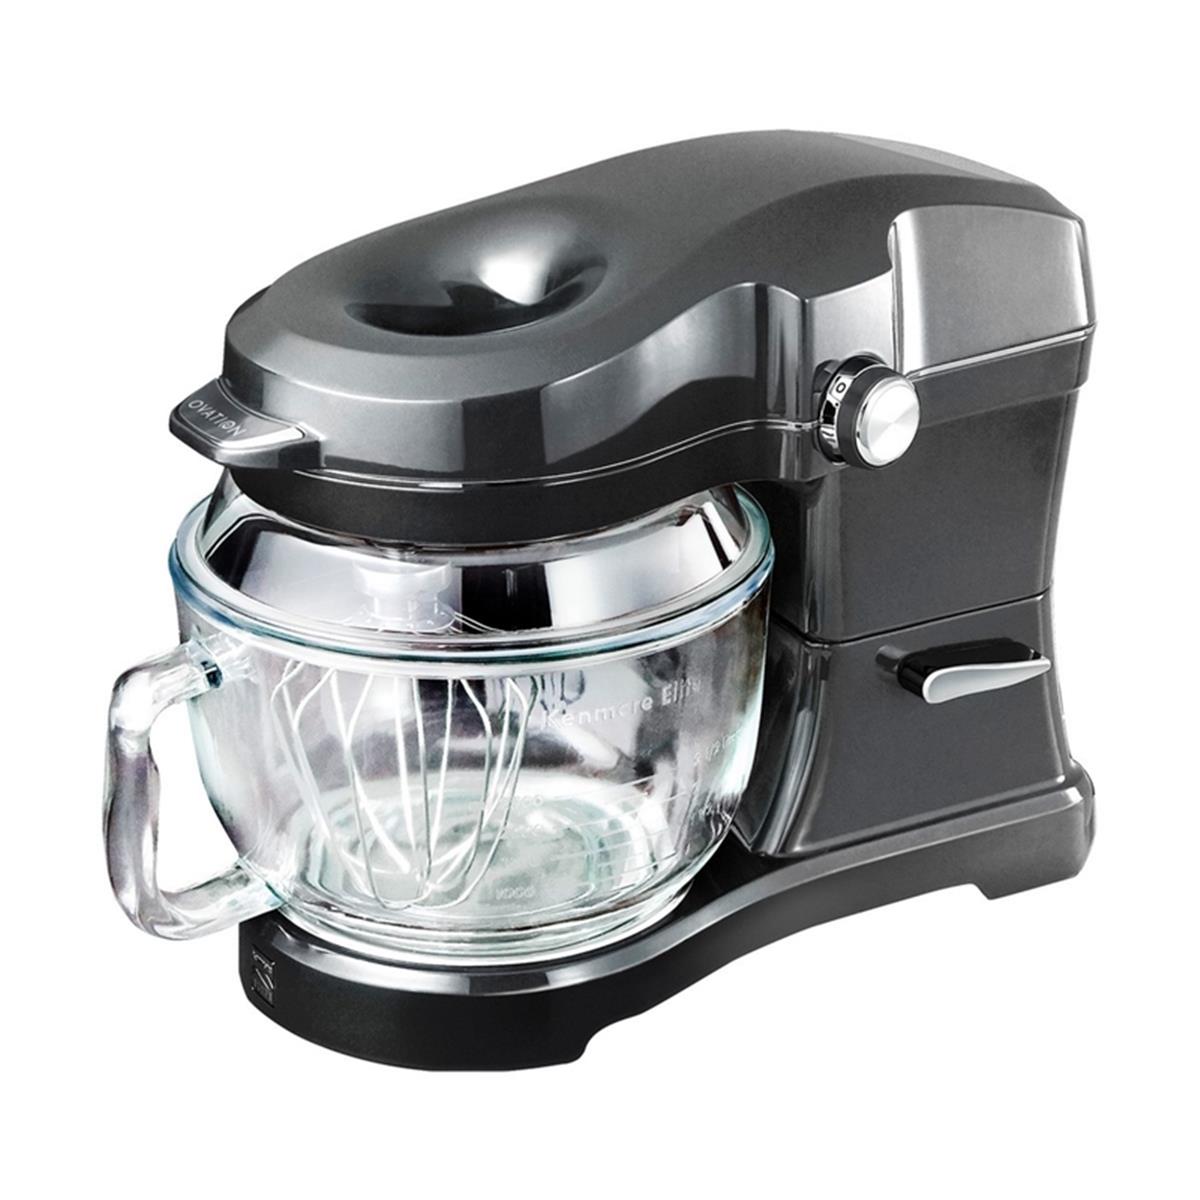 Picture of Kenmore 6037641 5 qt. Elite Gray 10 Speed Stand Mixer